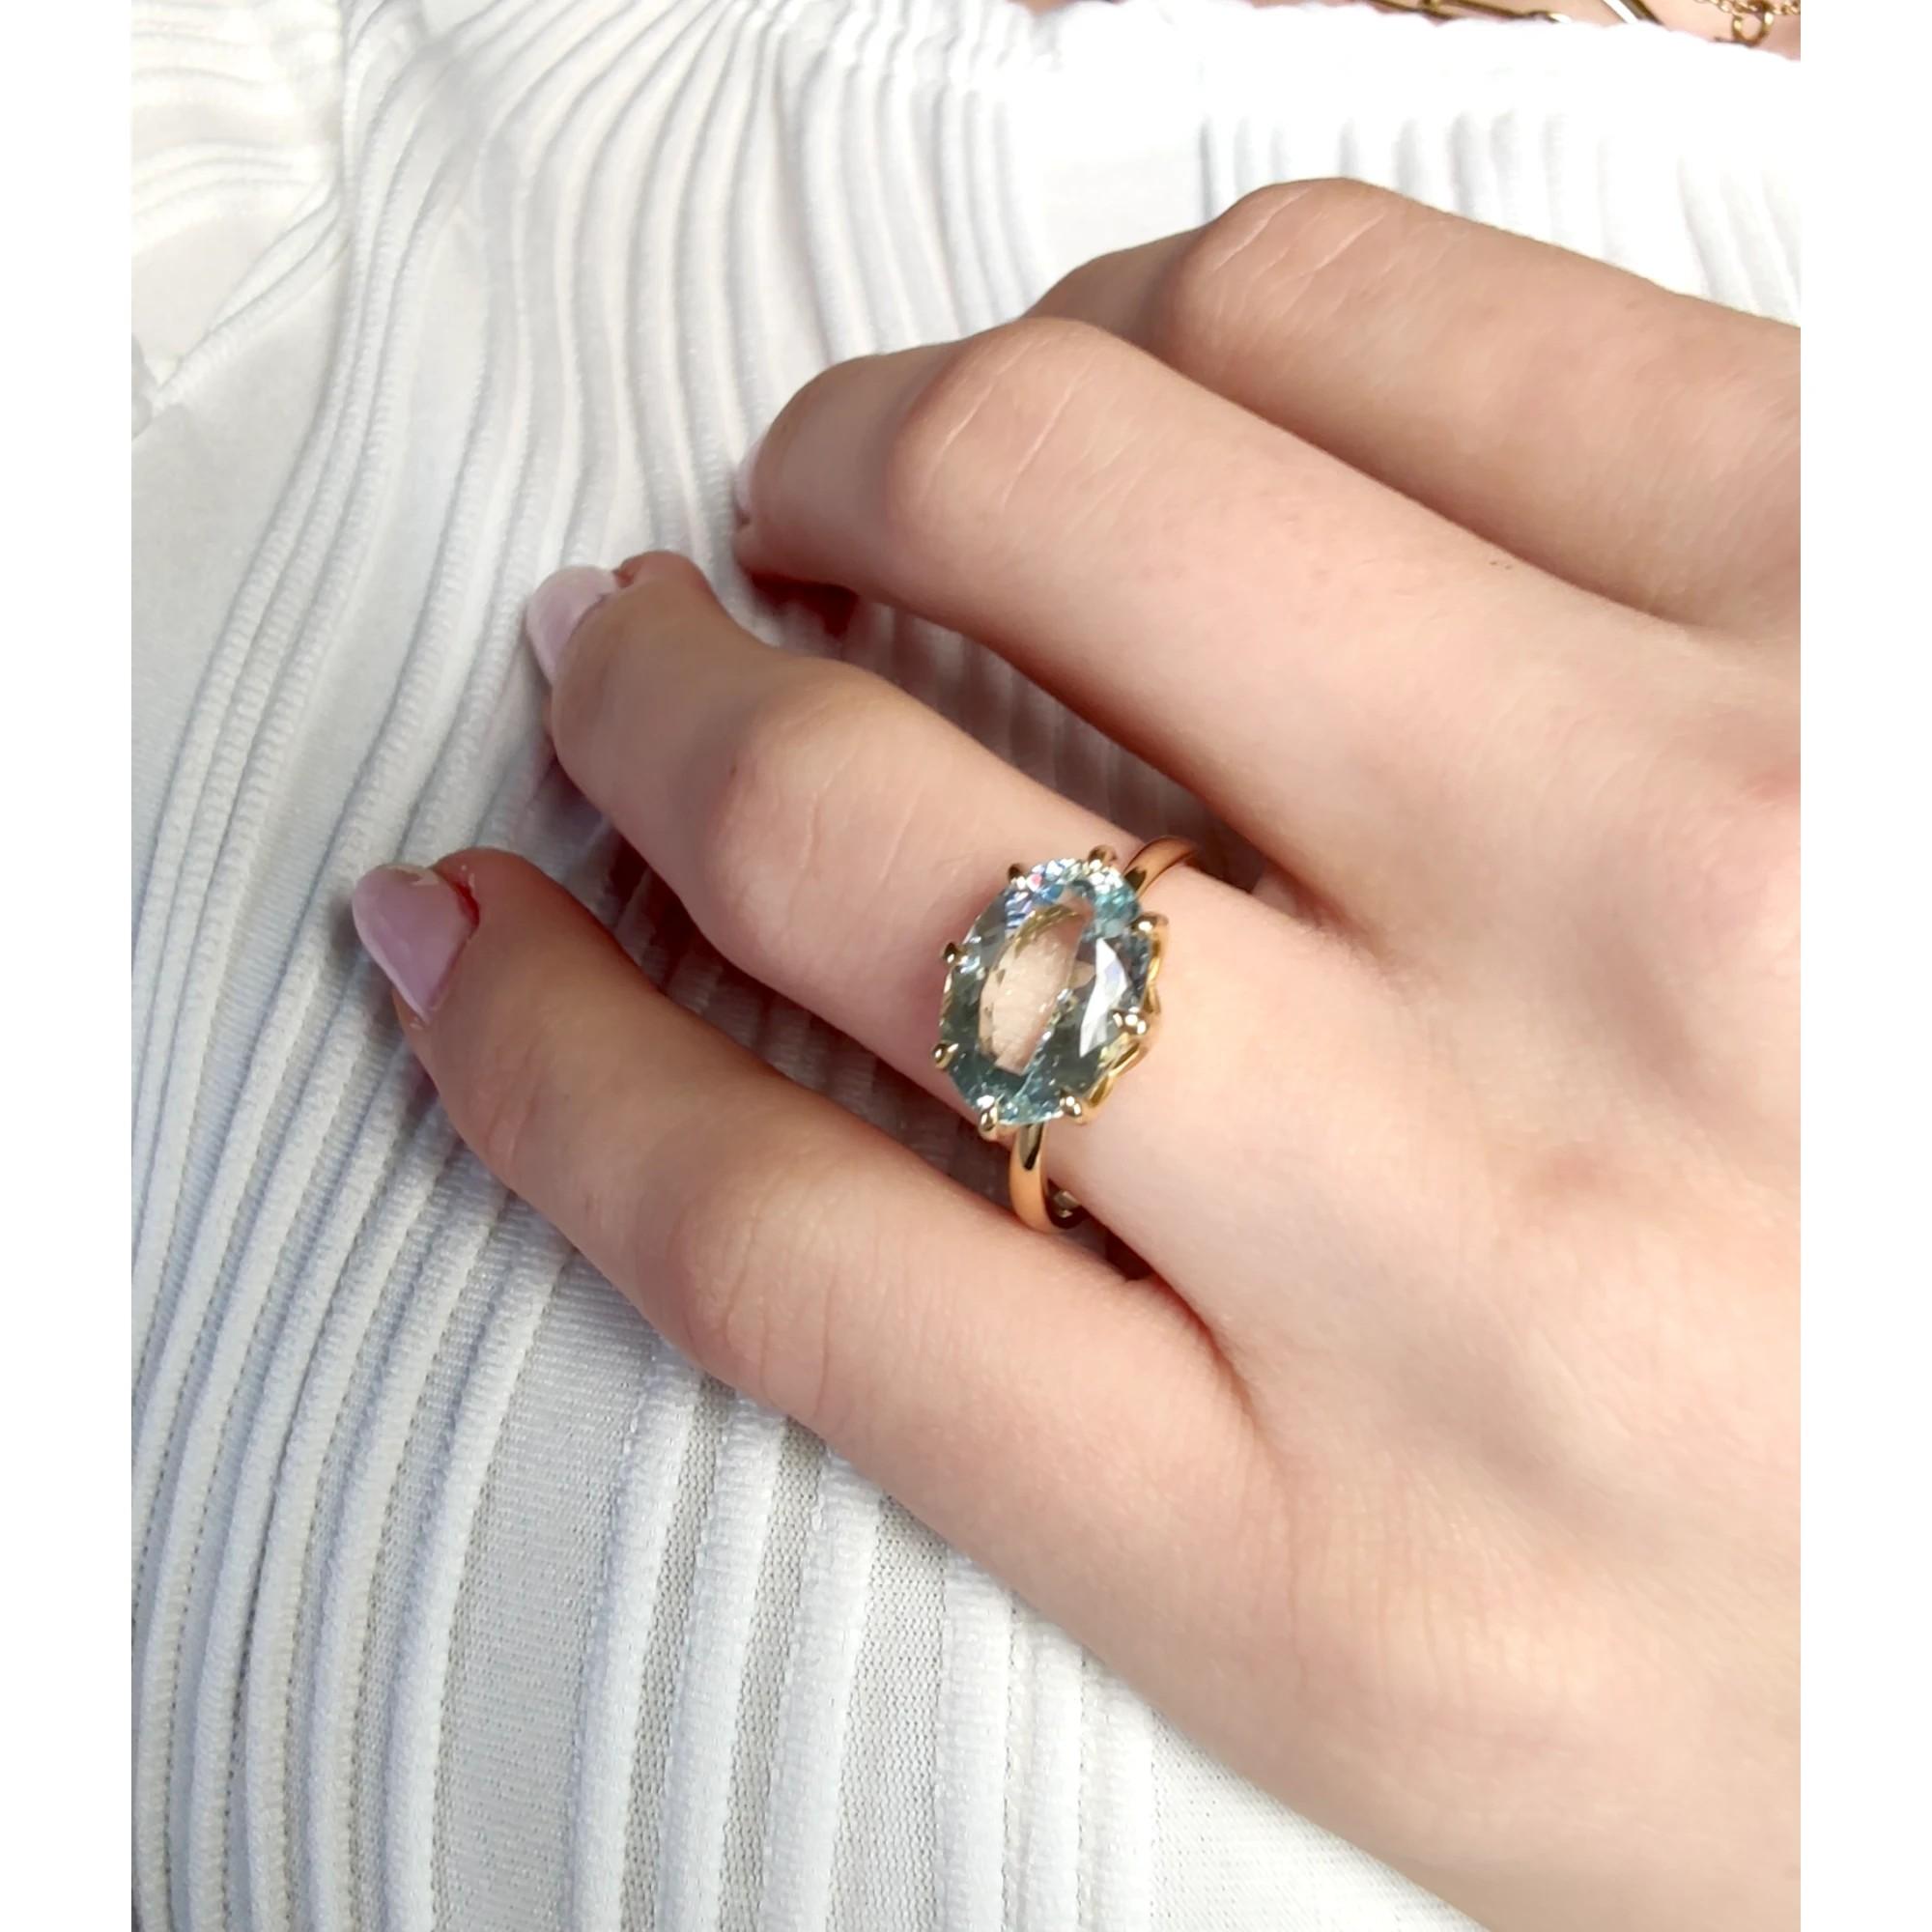 This gemstone engagement ring showcases a 3,38 -carat oval-cut aquamarine, elegantly set in prongs and complemented by round brilliant cut diamonds adorning the shoulders.  The ring is meticulously handcrafted in 18k yellow gold, creating a stunning